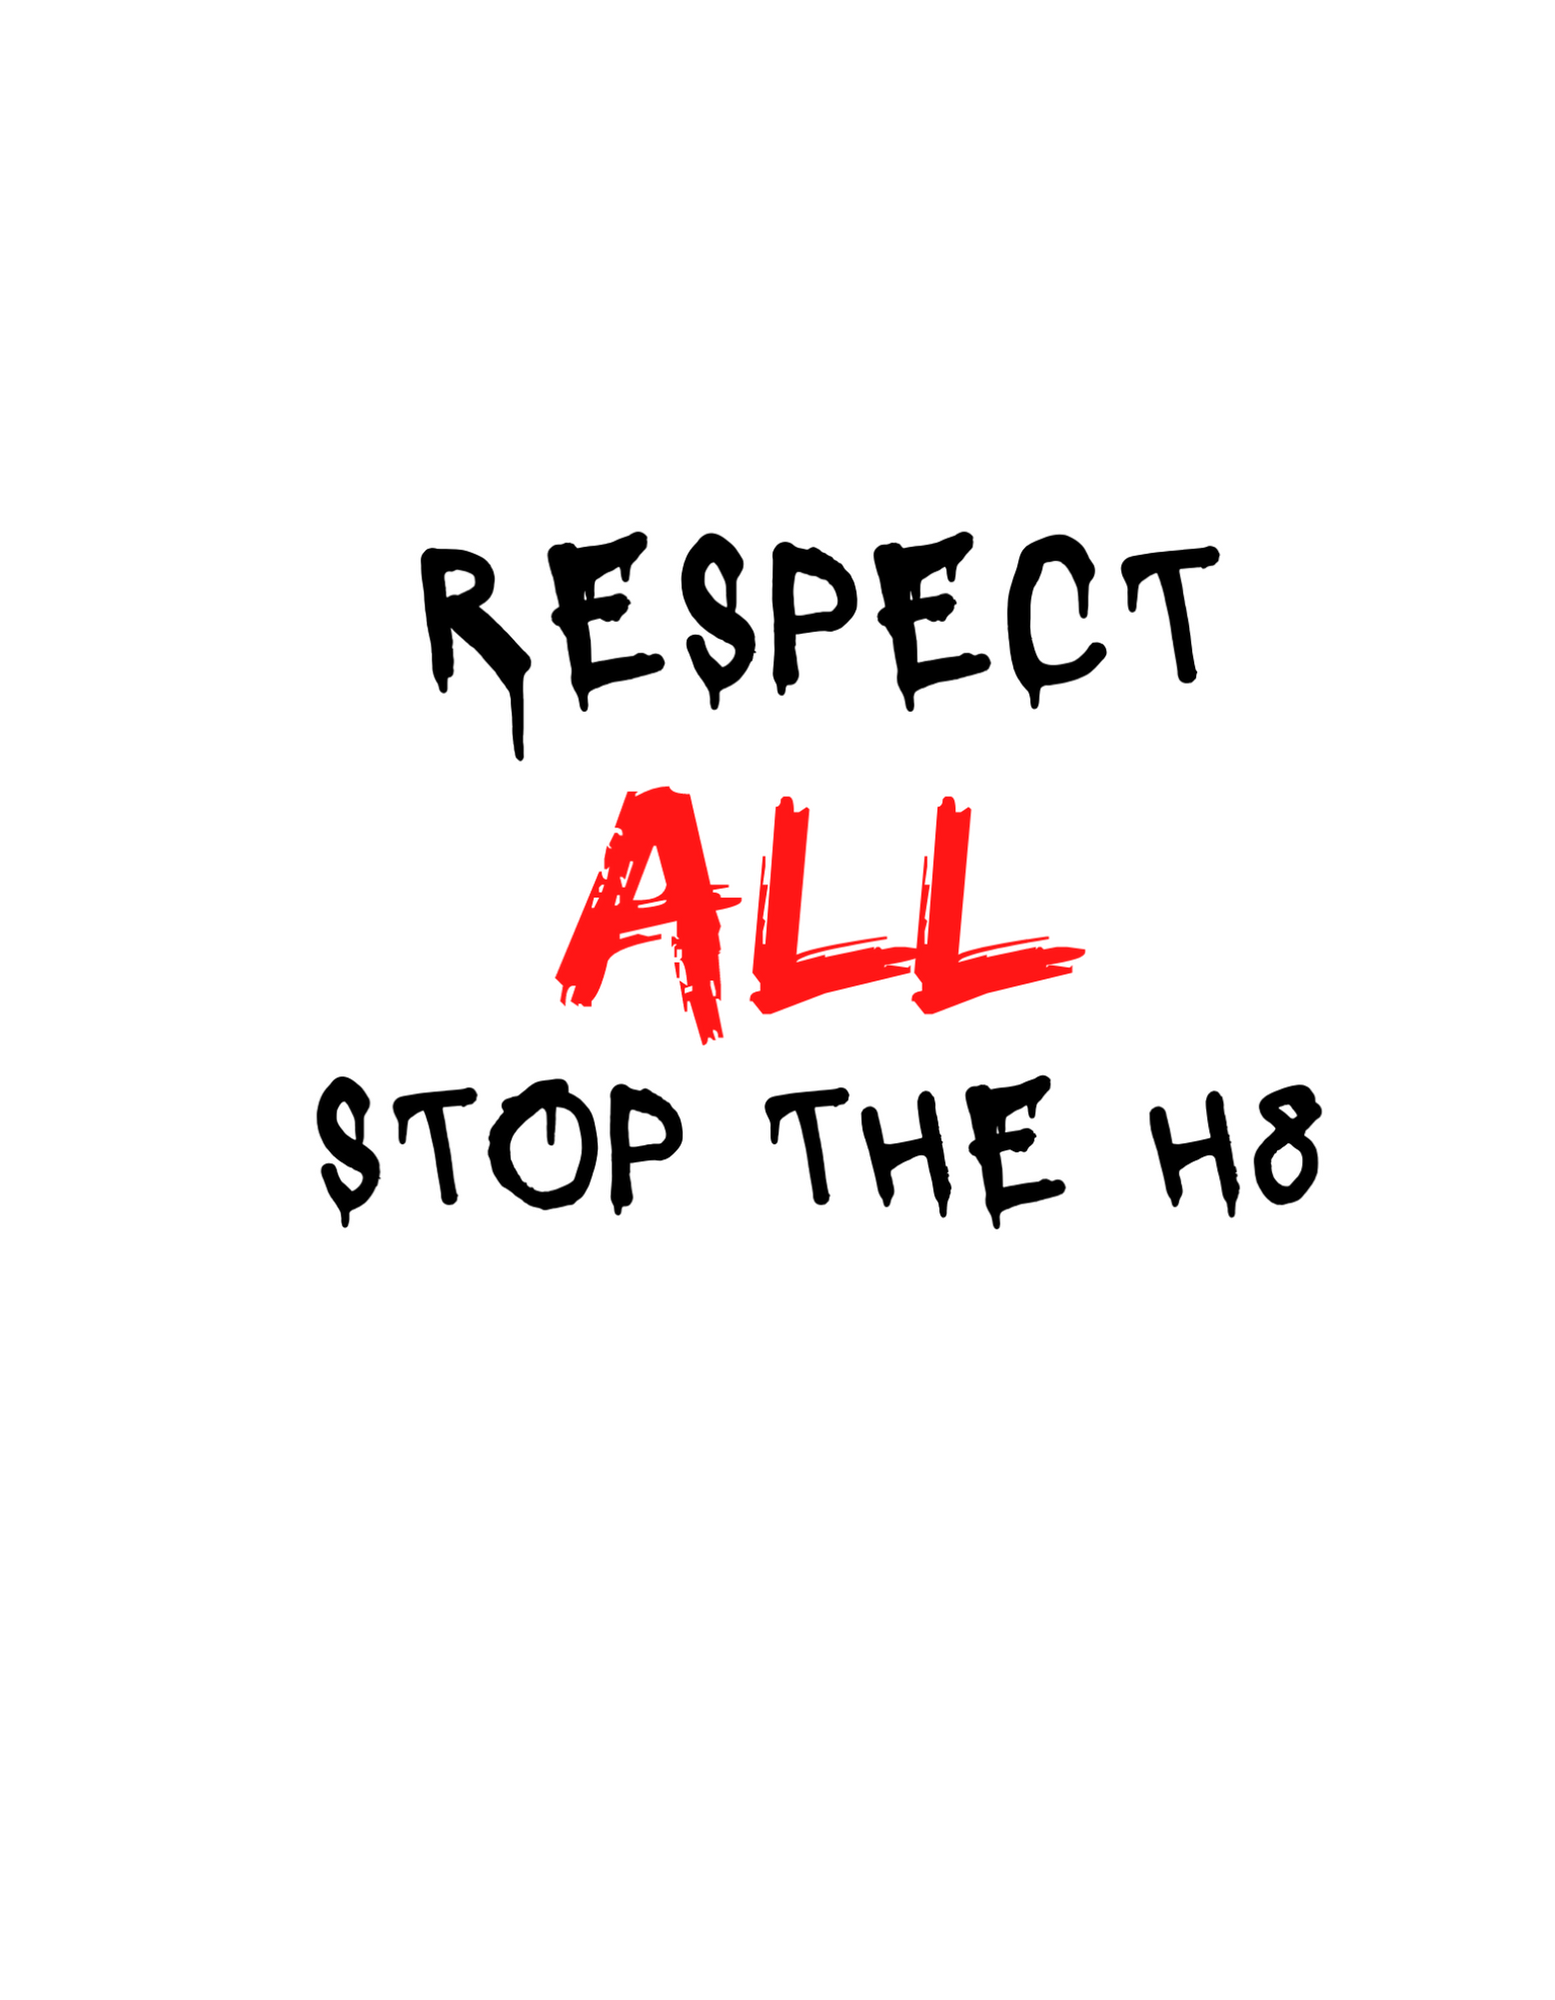 Respect All Stop The 8 Sticker